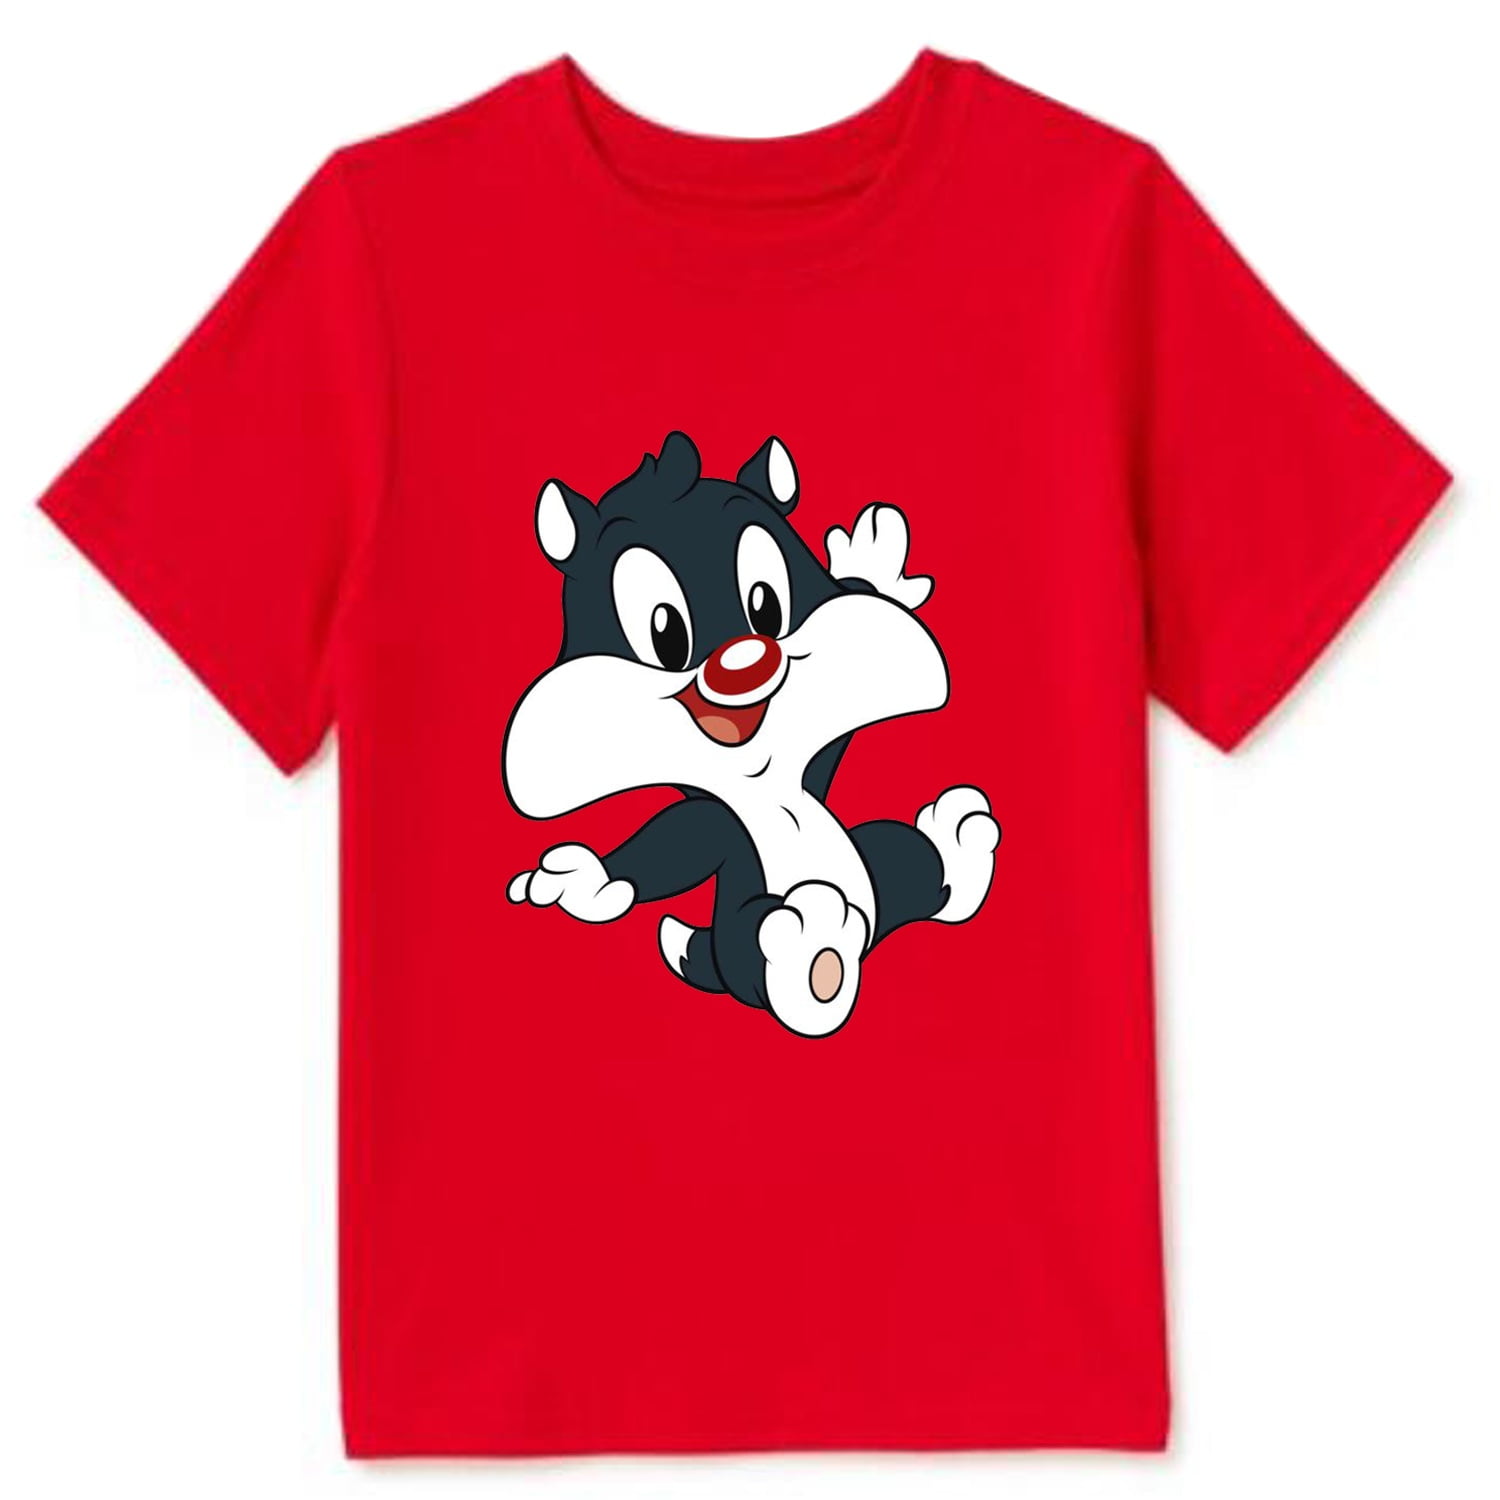 Scoop Girls Cat for Tees Girls Cotton Neck Looney Sylvester Relaxed Baby T-Shirts Short Kids Boys Gift Tunes Cartoon Sleeve Tops Casual